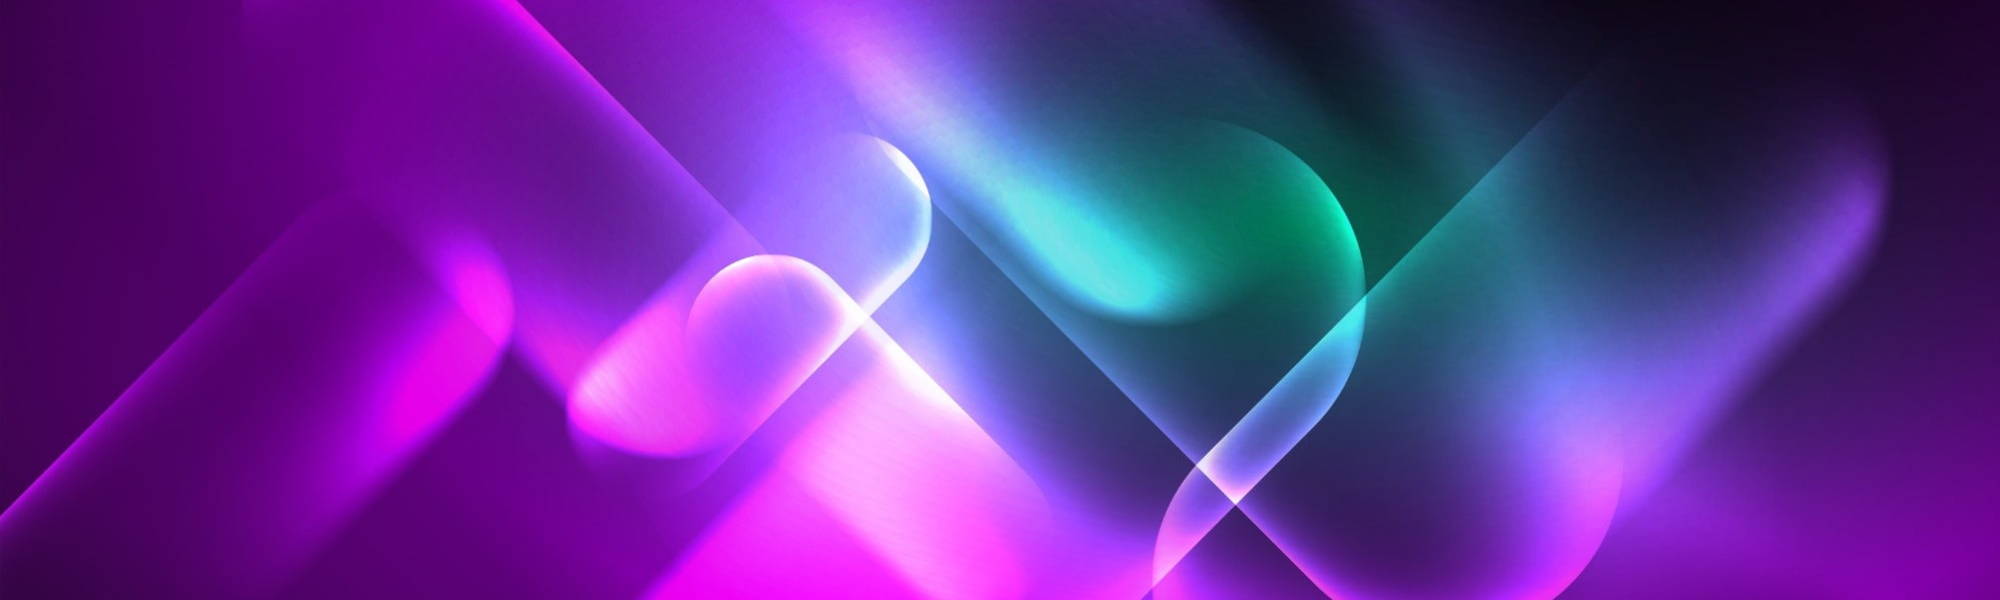 Blue and purple image